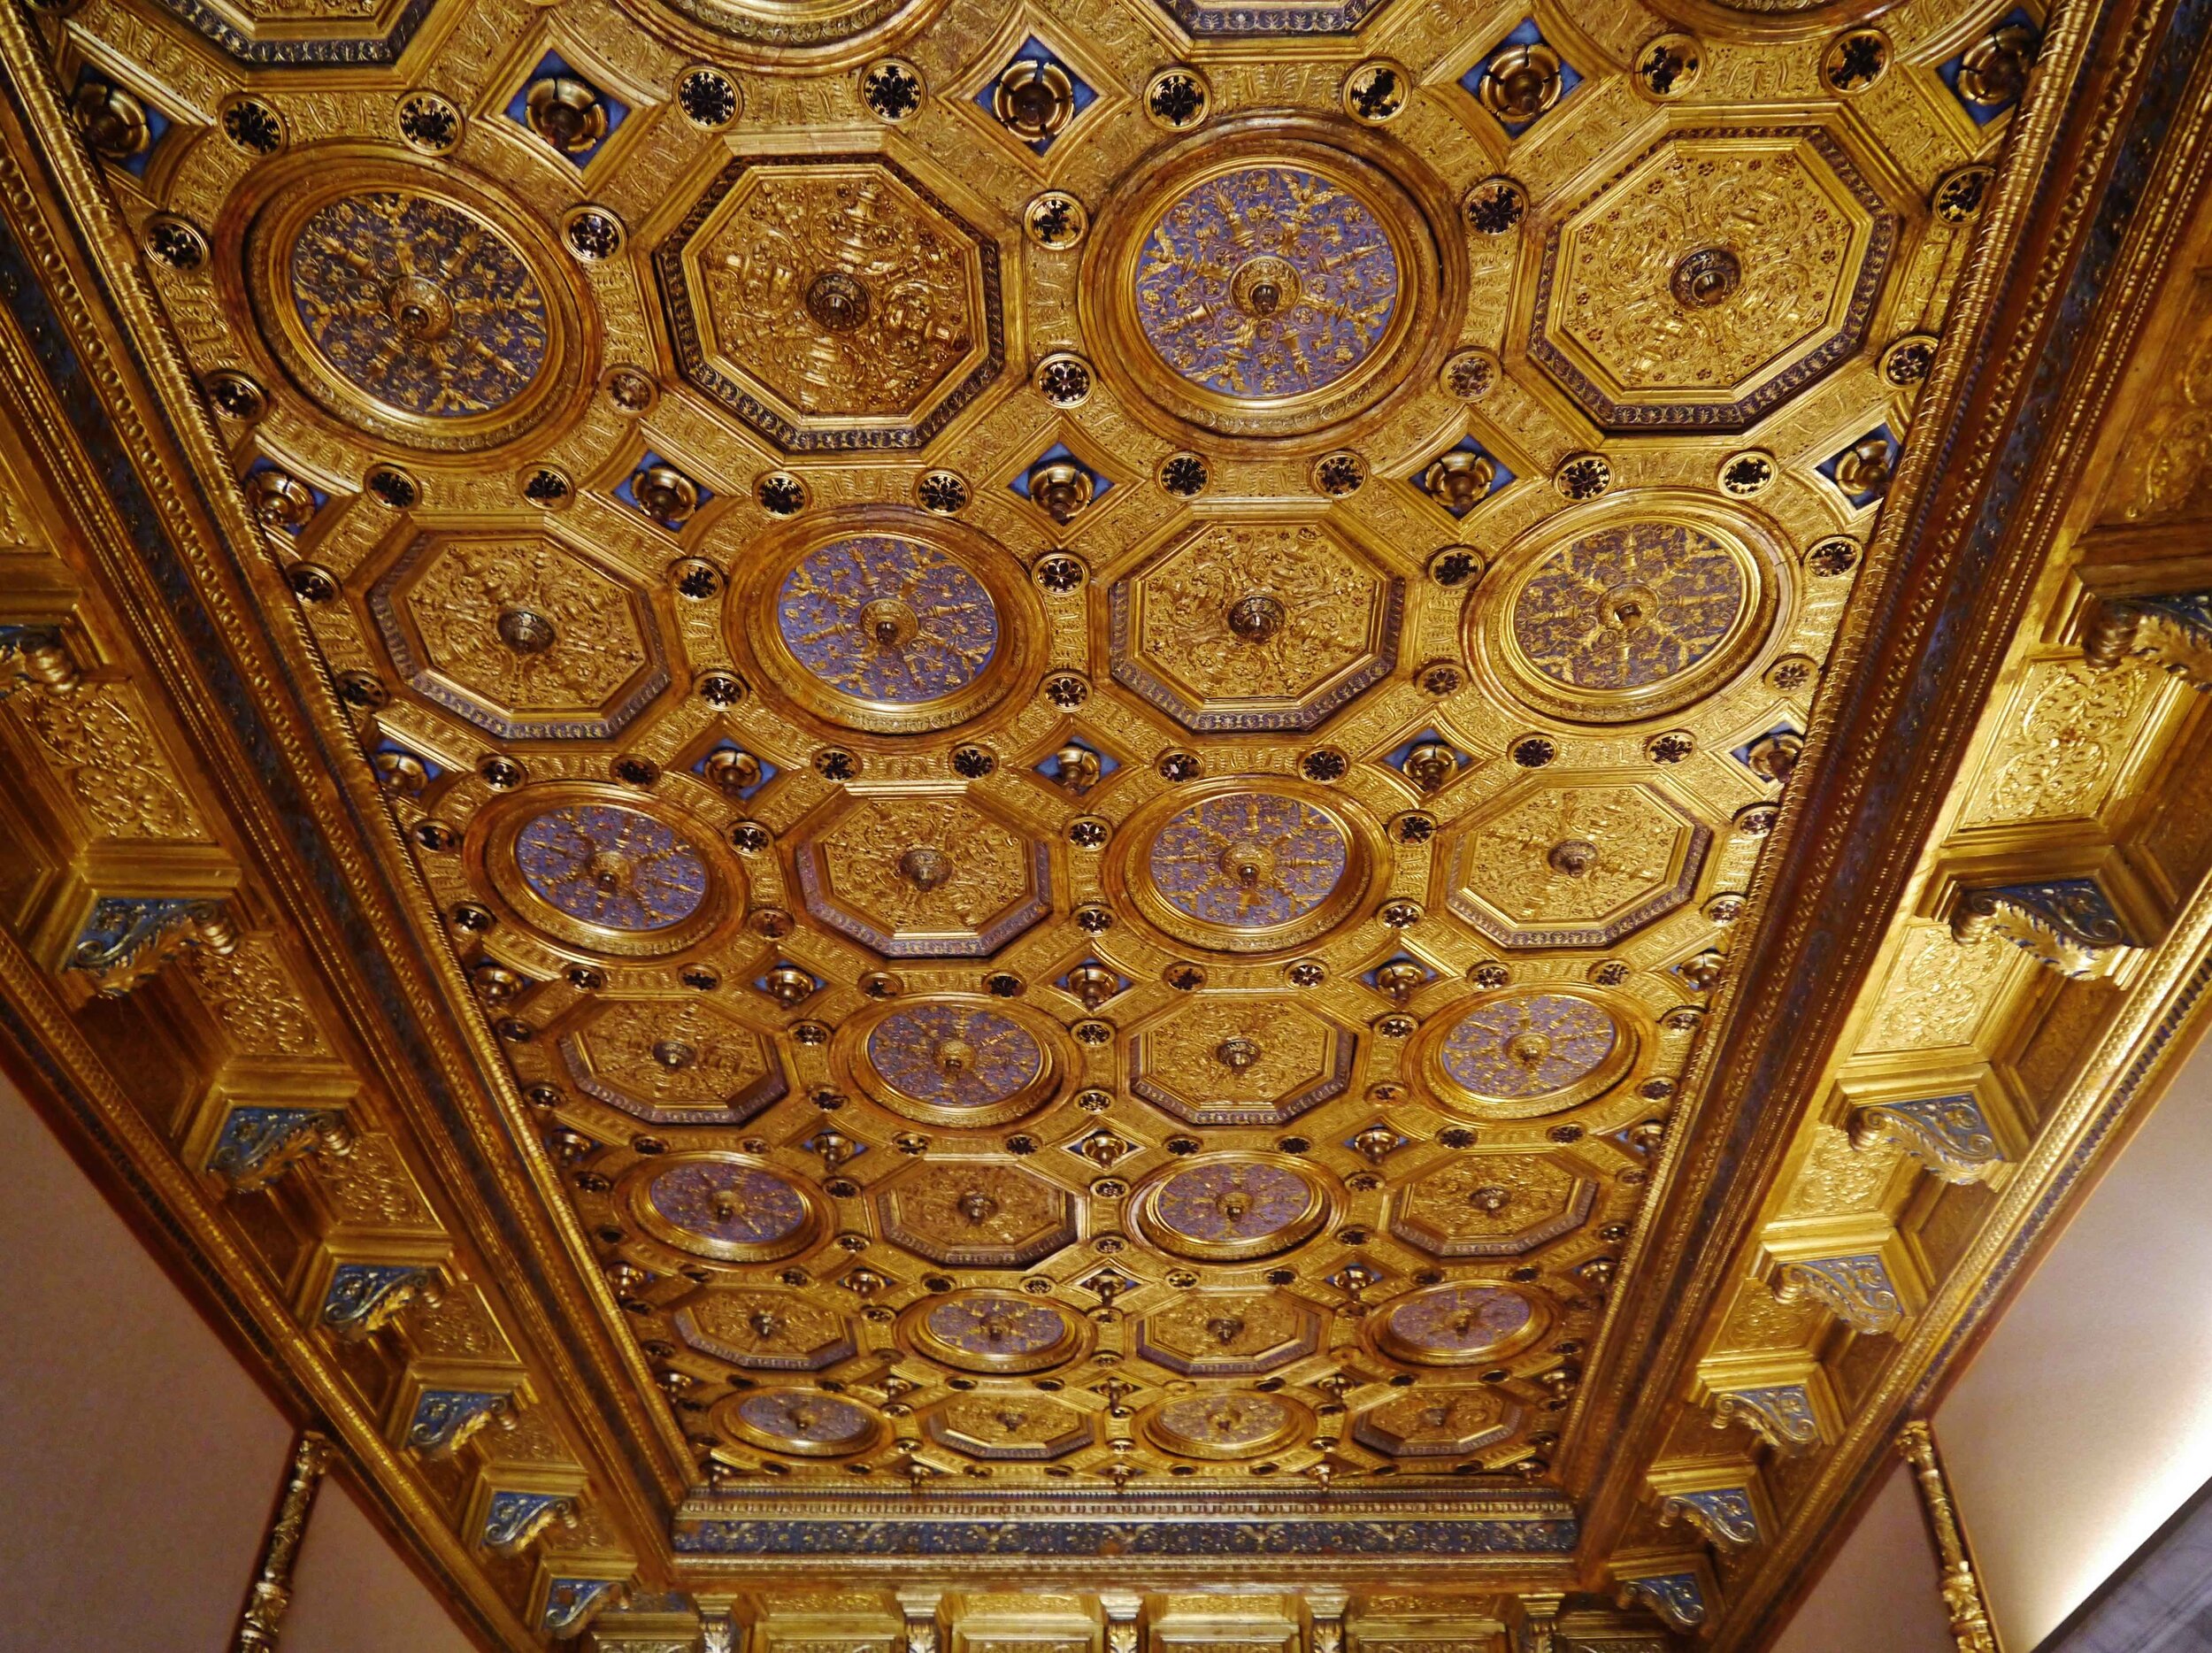 Fig. 9 Ceiling of Isabella’s studiolo in the Ducal Palace, Mantua. Image: Wikimedia commons/Zairon (CC-BY-SA 4.0) .